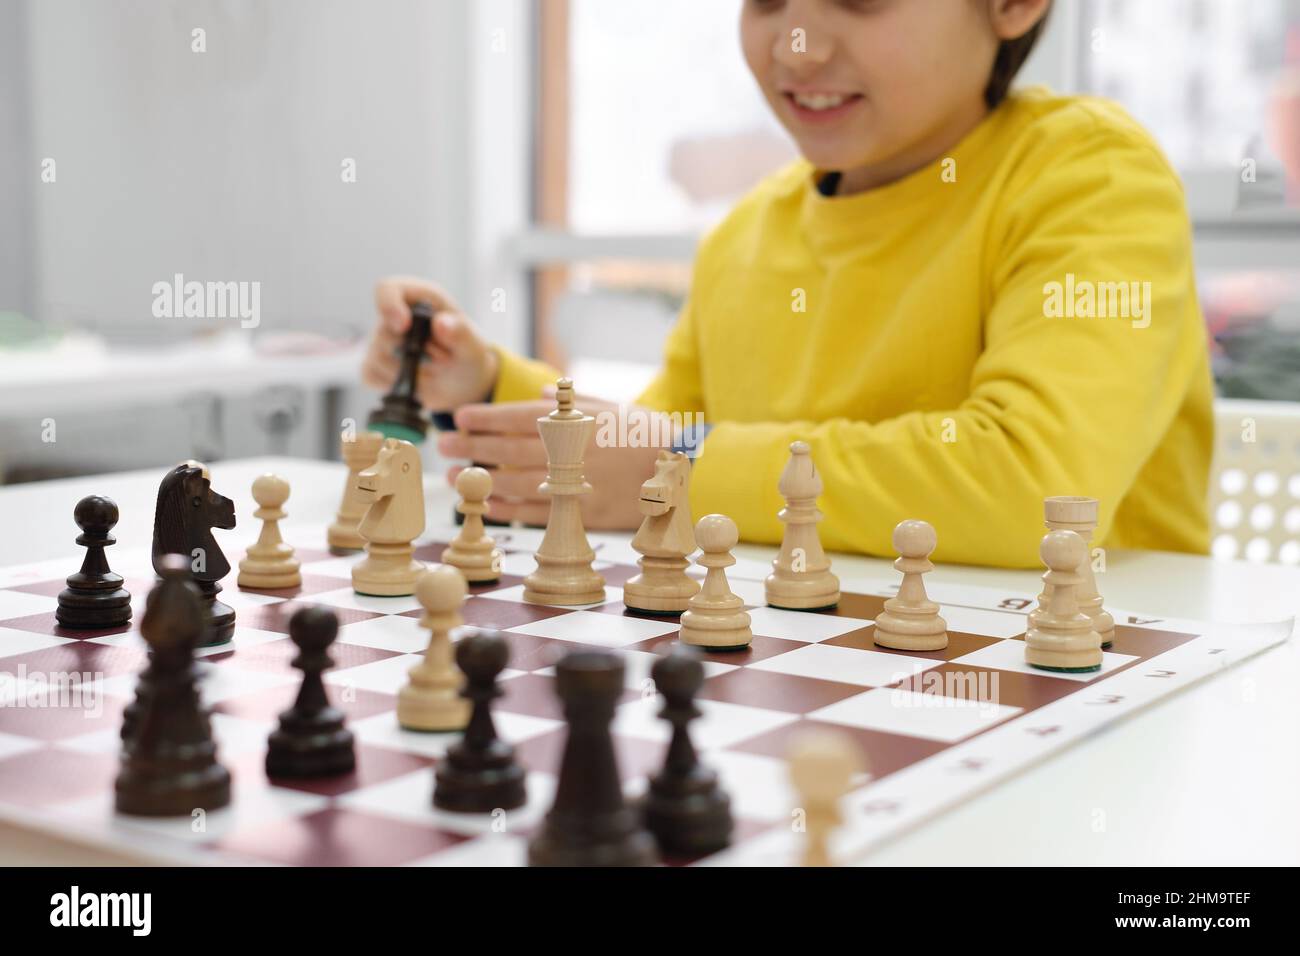 Closeup hand Caucasian boy playing chess. Happy concentrated child behind chess in class or school lesson. Excited clever elementary school kid with Stock Photo